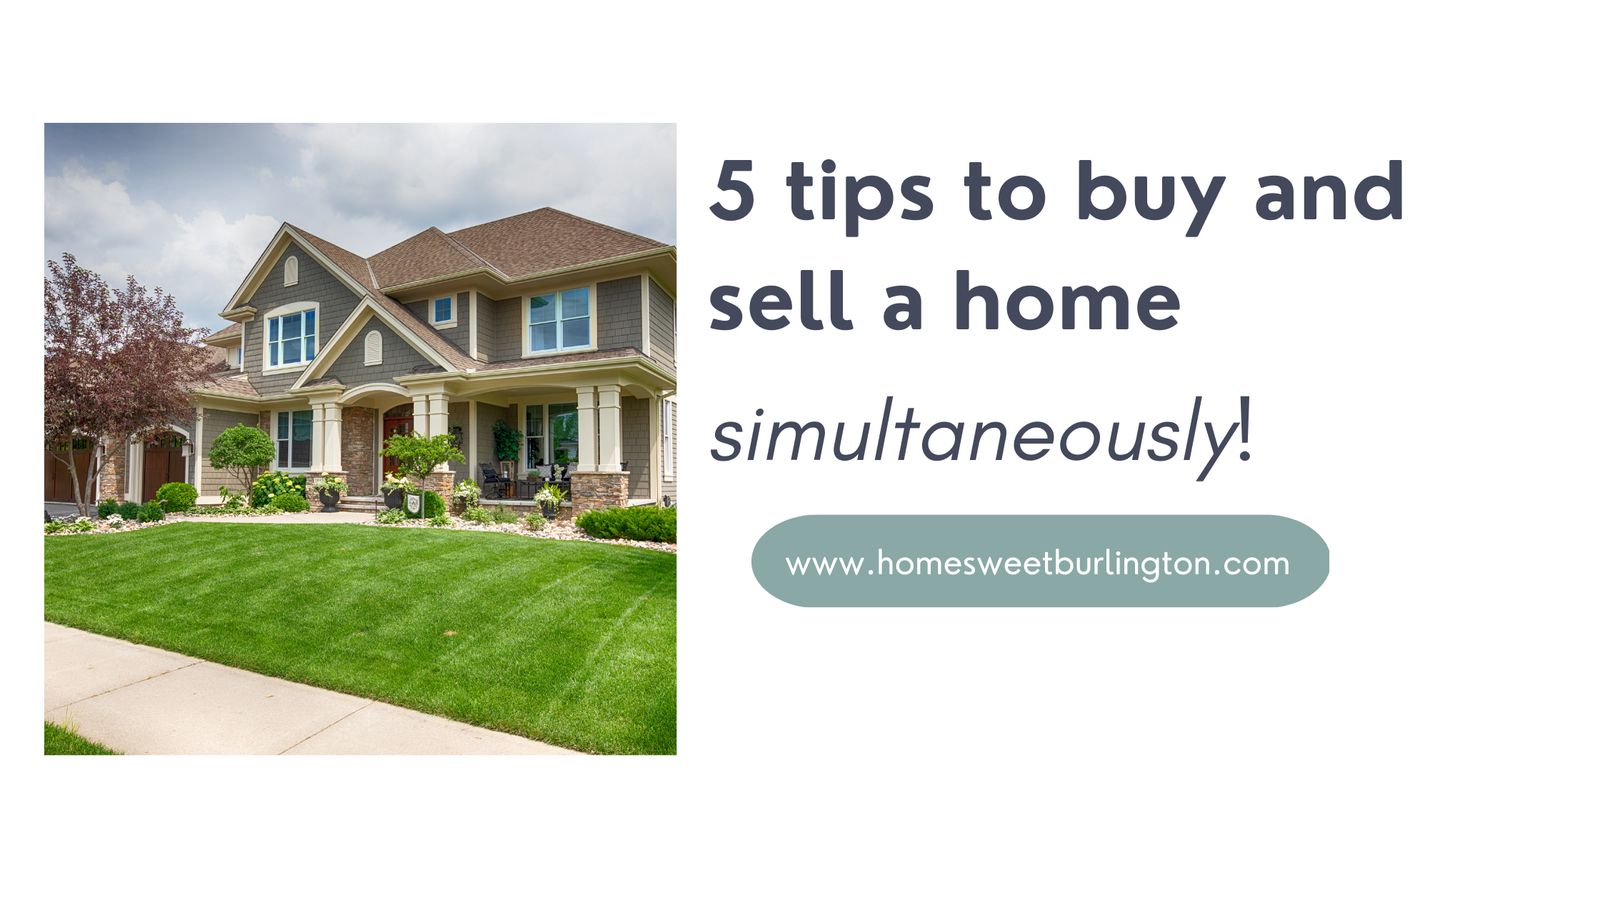 Tips to buy and sell at the same time